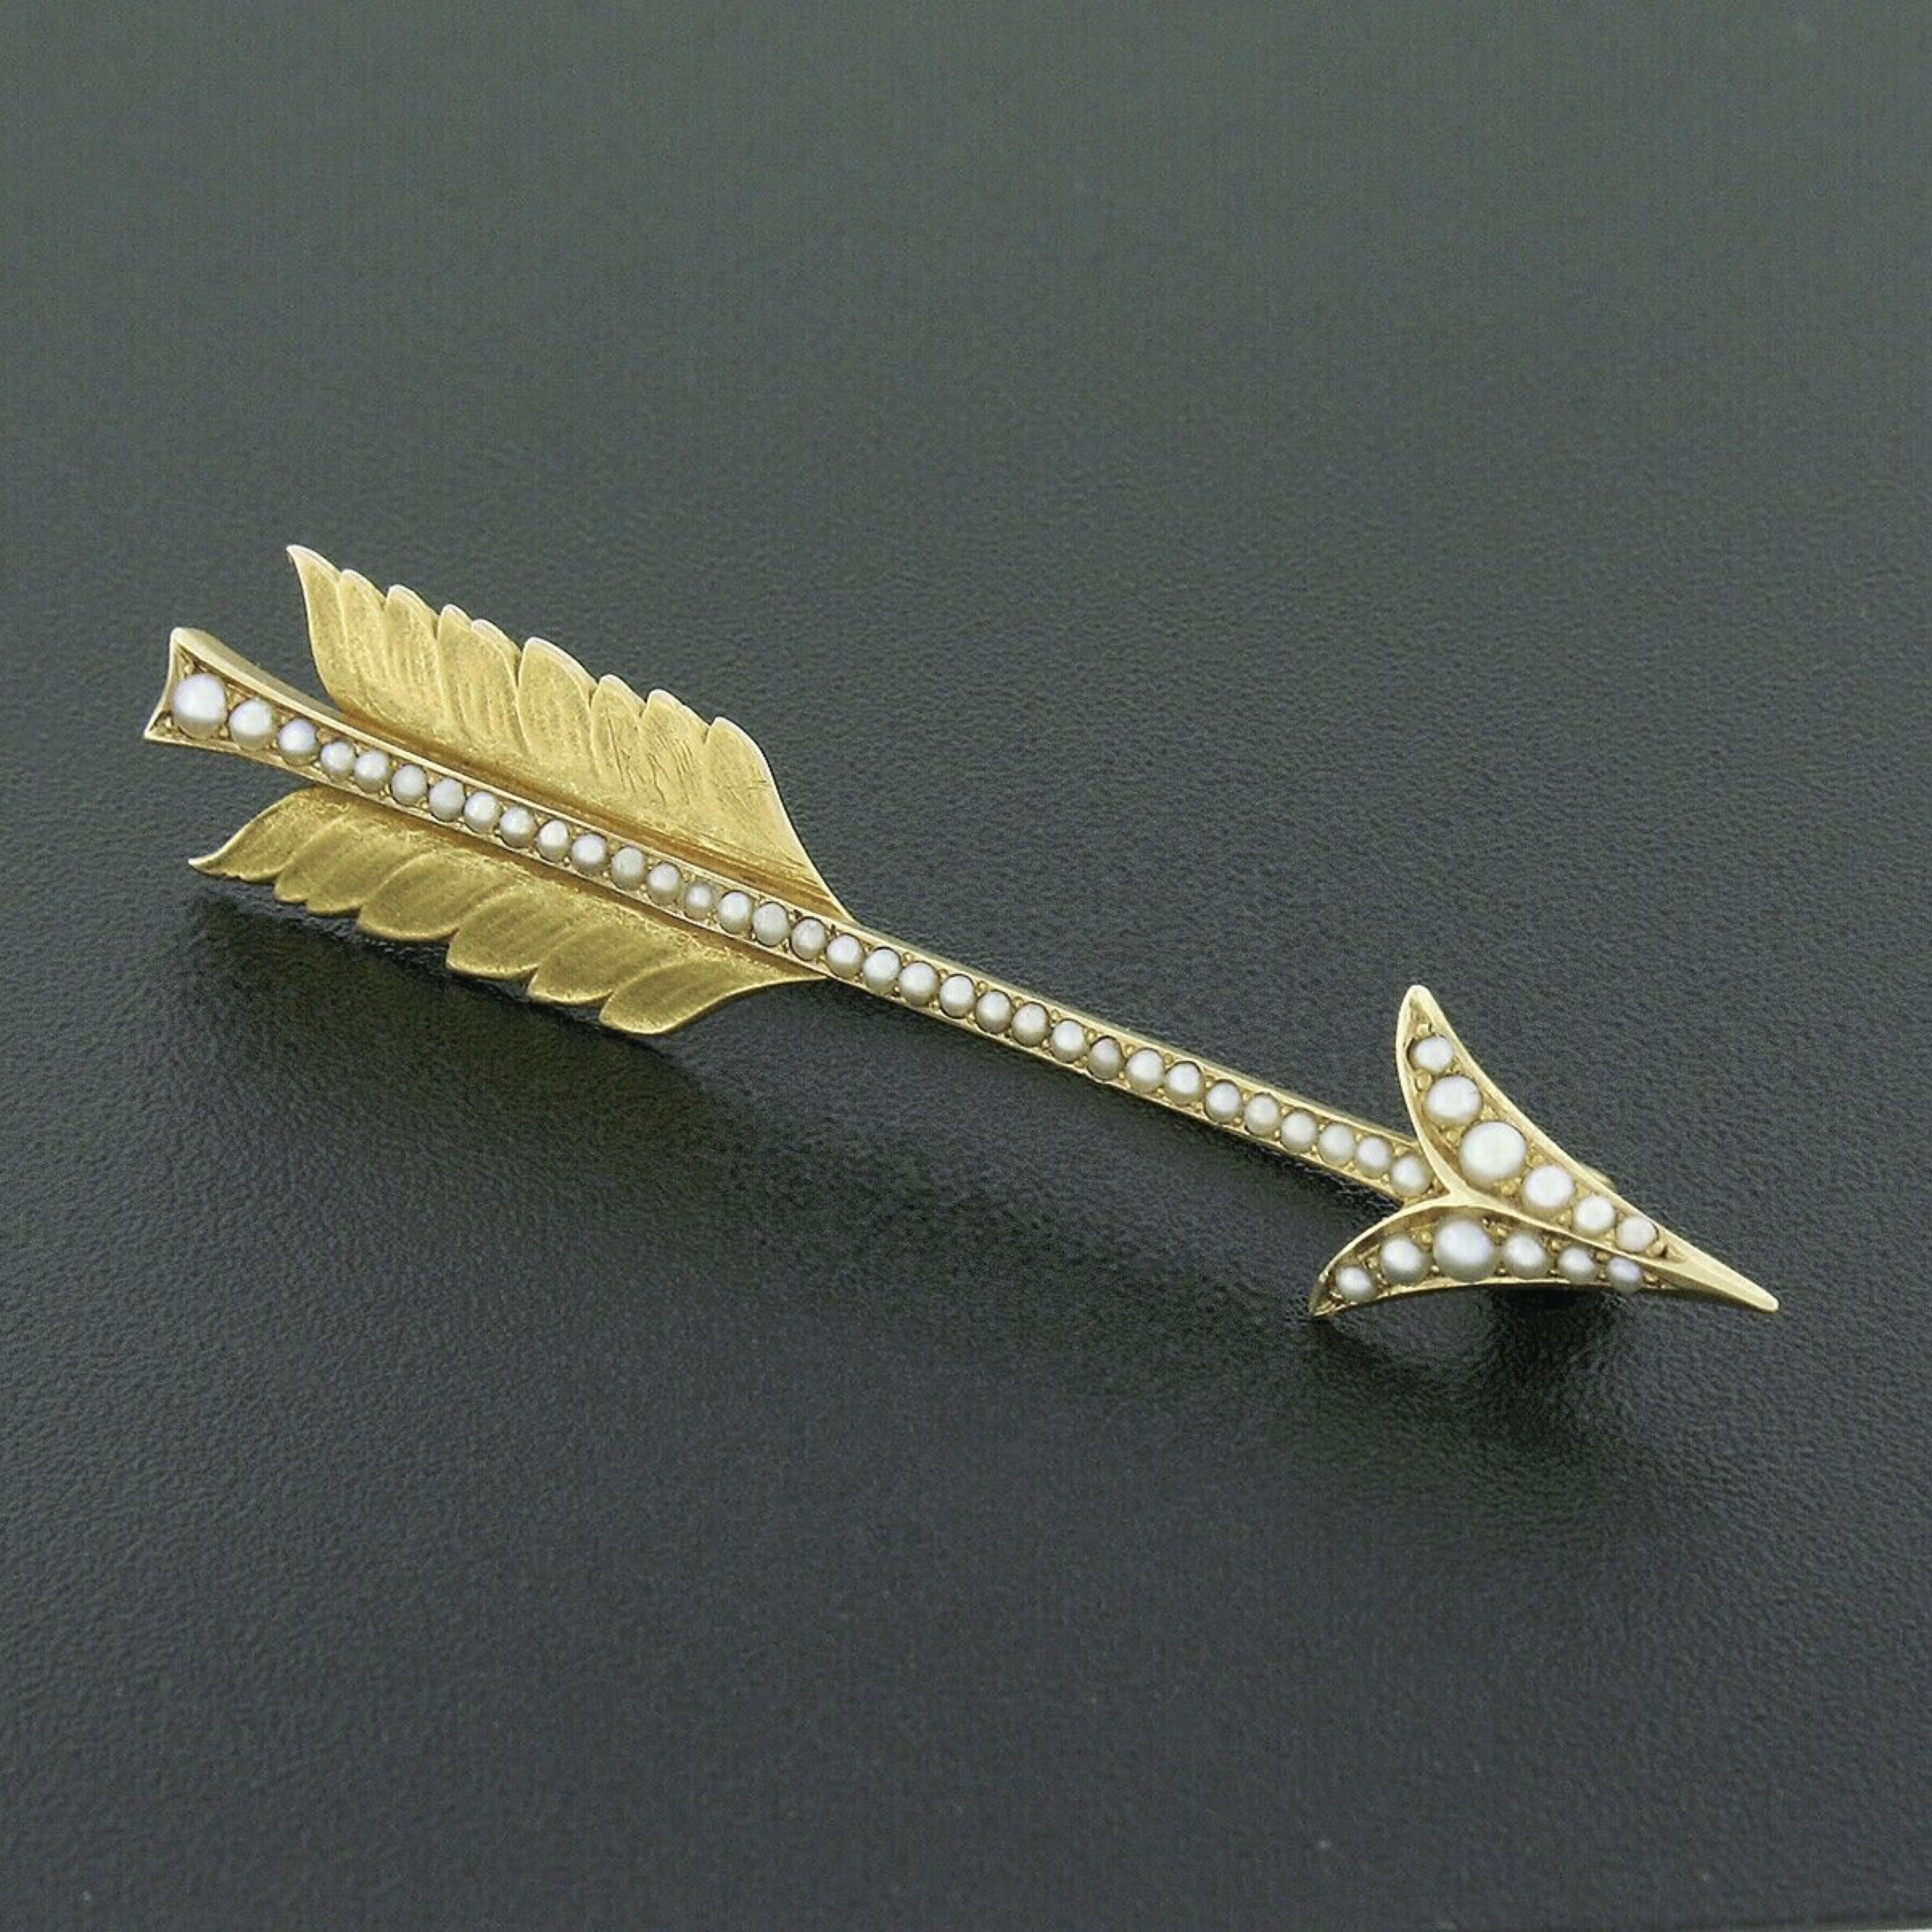 This incredible antique pin brooch was crafted from solid 14k yellow gold during the art nouveau period and features an outstandingly made and detailed arrow design that is neatly set with cultured seed pearls throughout. The adorable pearls create